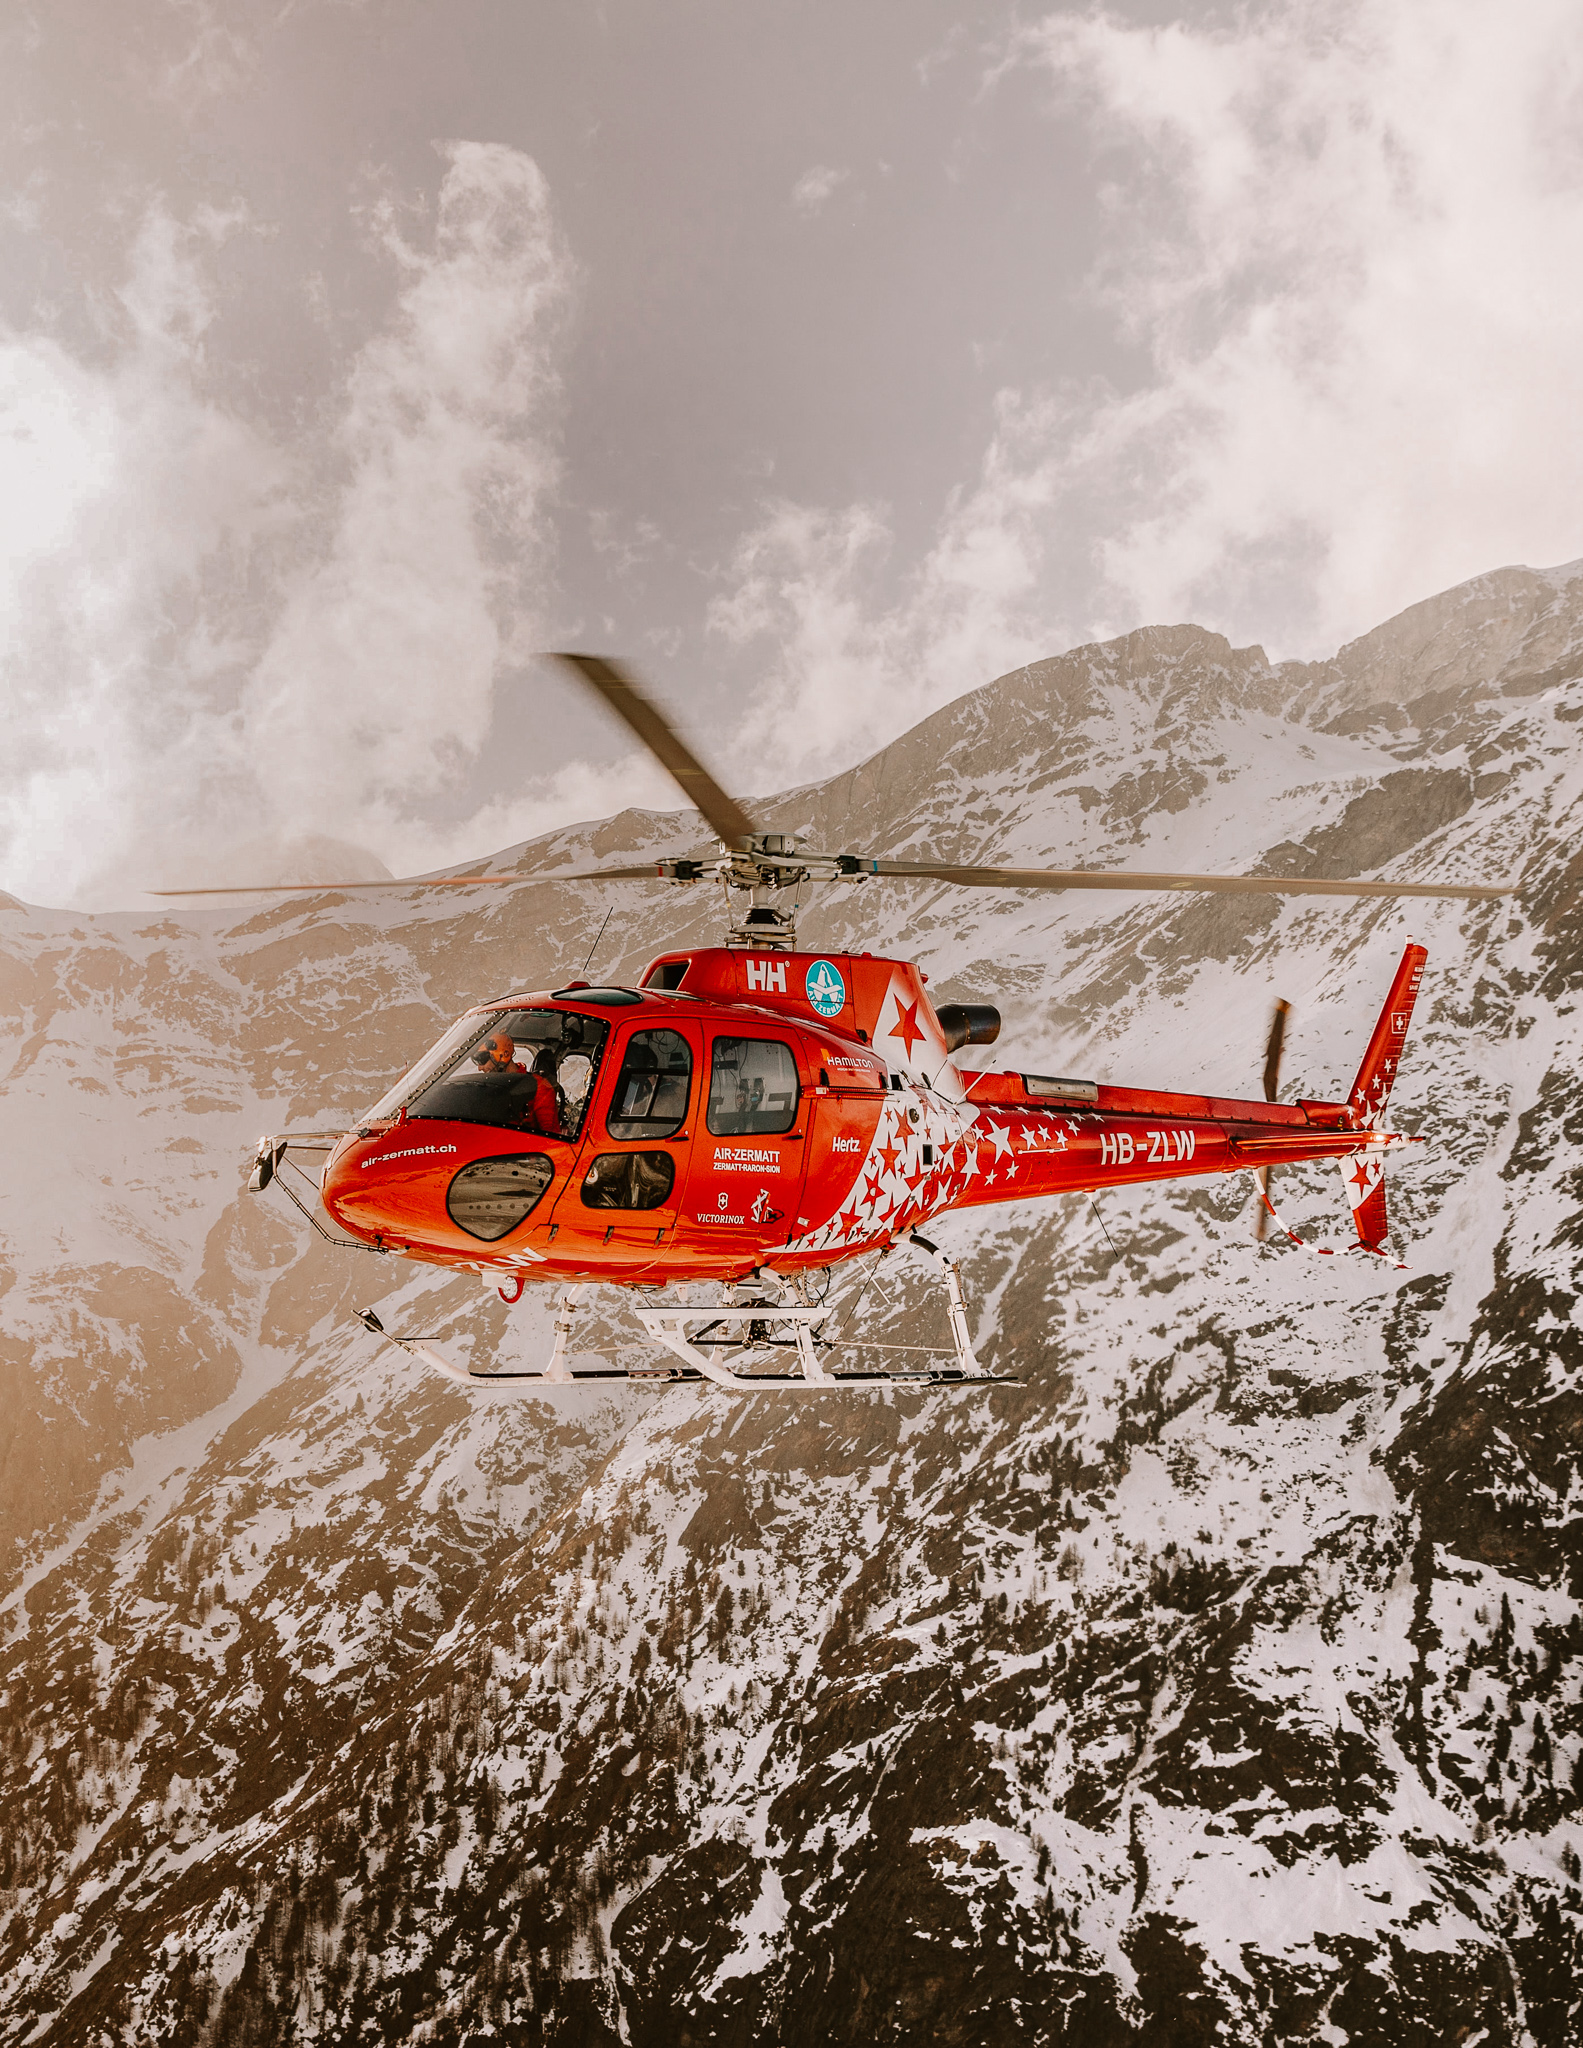 A single red helicopter suspended in middair, in front of a snowy mountain in the alps